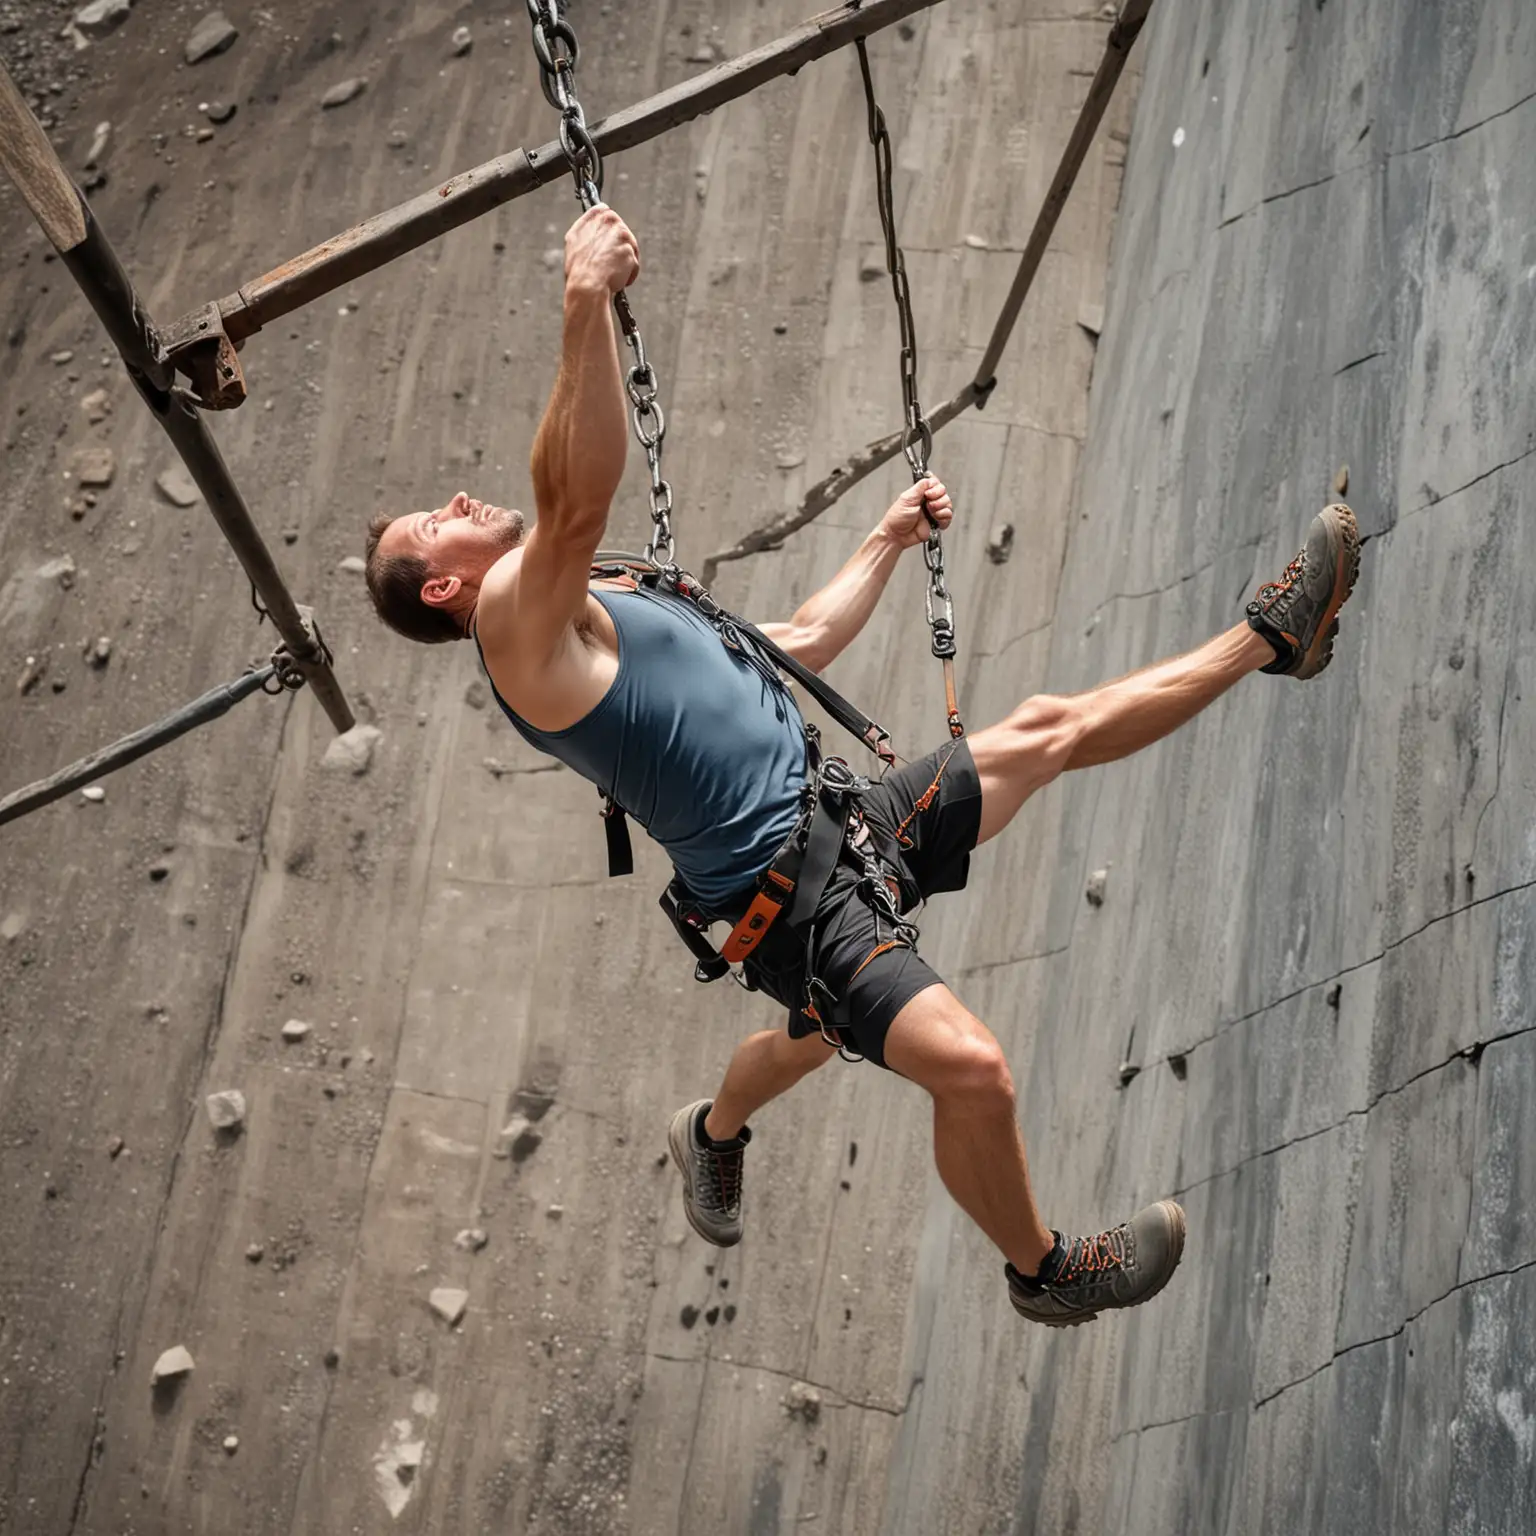 Adventurous-MiddleAged-Climber-Hanging-from-Metal-Beam